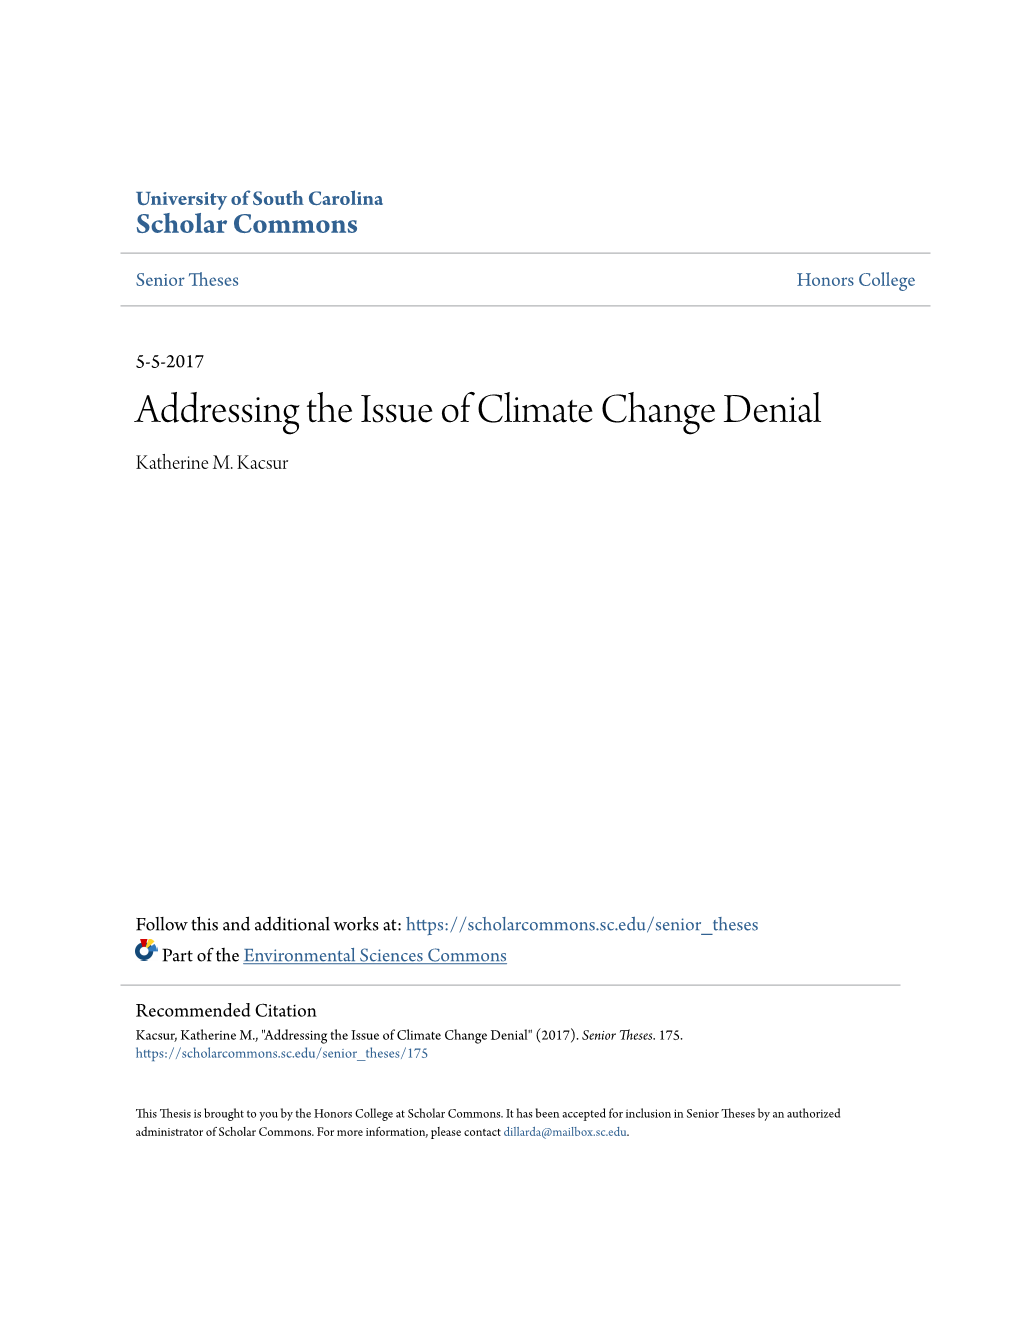 Addressing the Issue of Climate Change Denial Katherine M